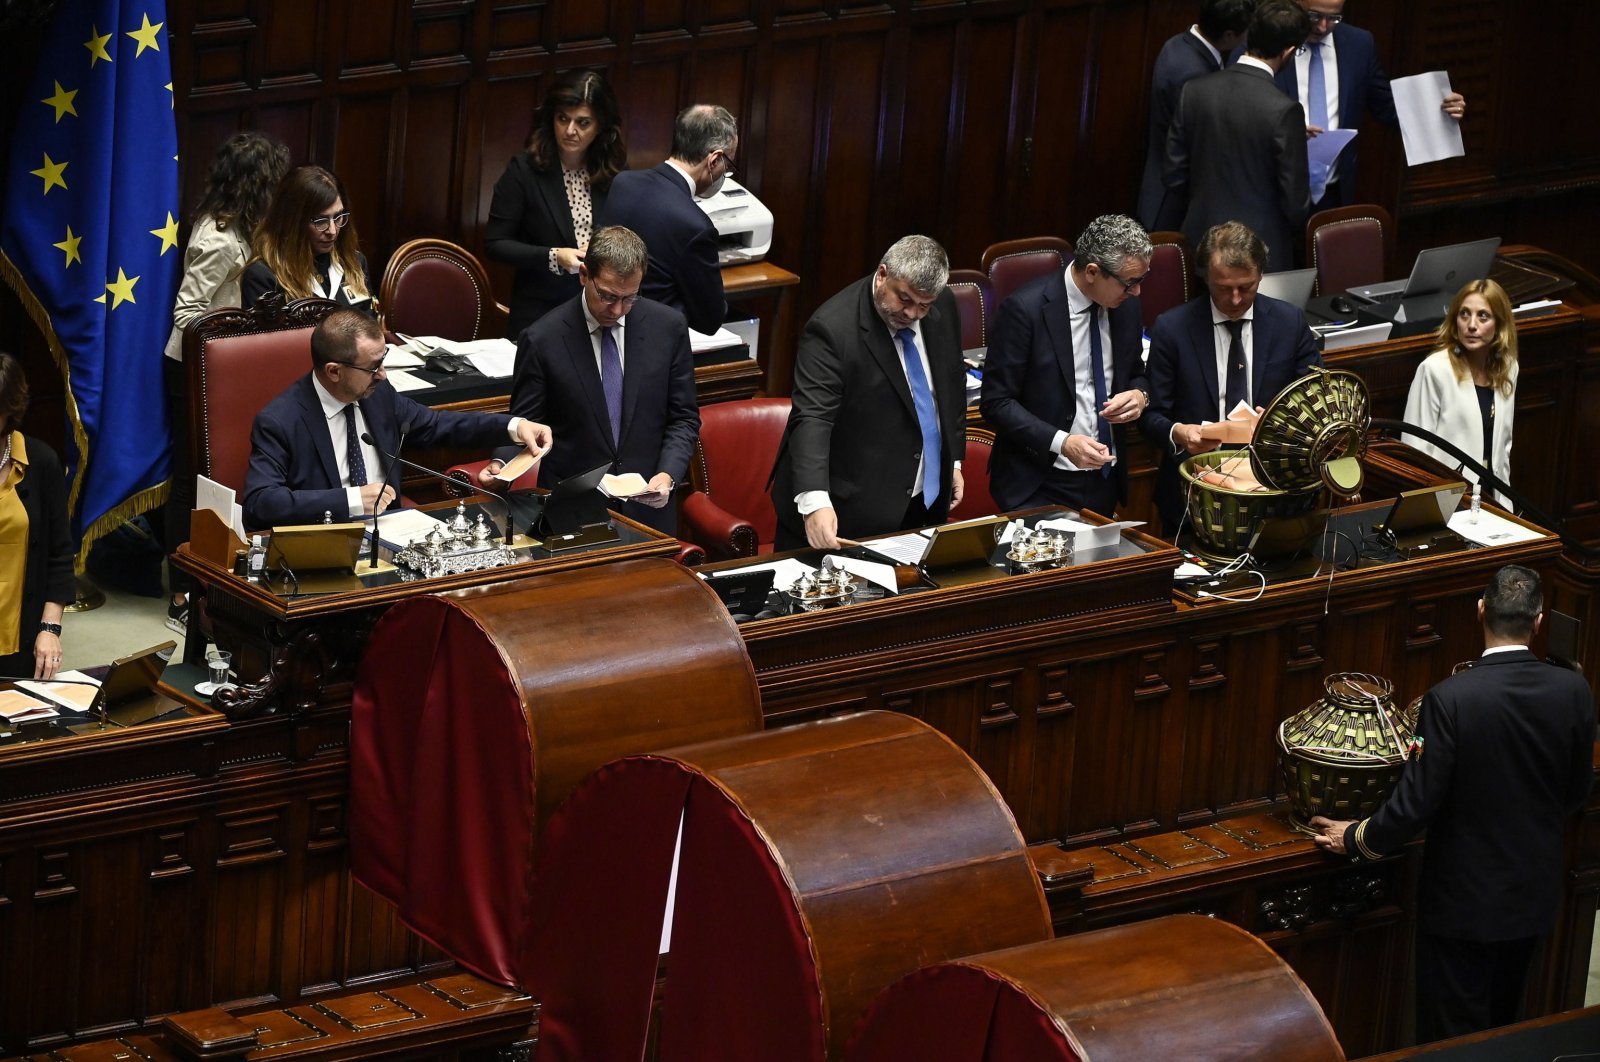 Members count the votes during the election of the speaker of the Italian chamber of deputies, Rome, Italy, Oct. 13 2022. (EPA Photo)